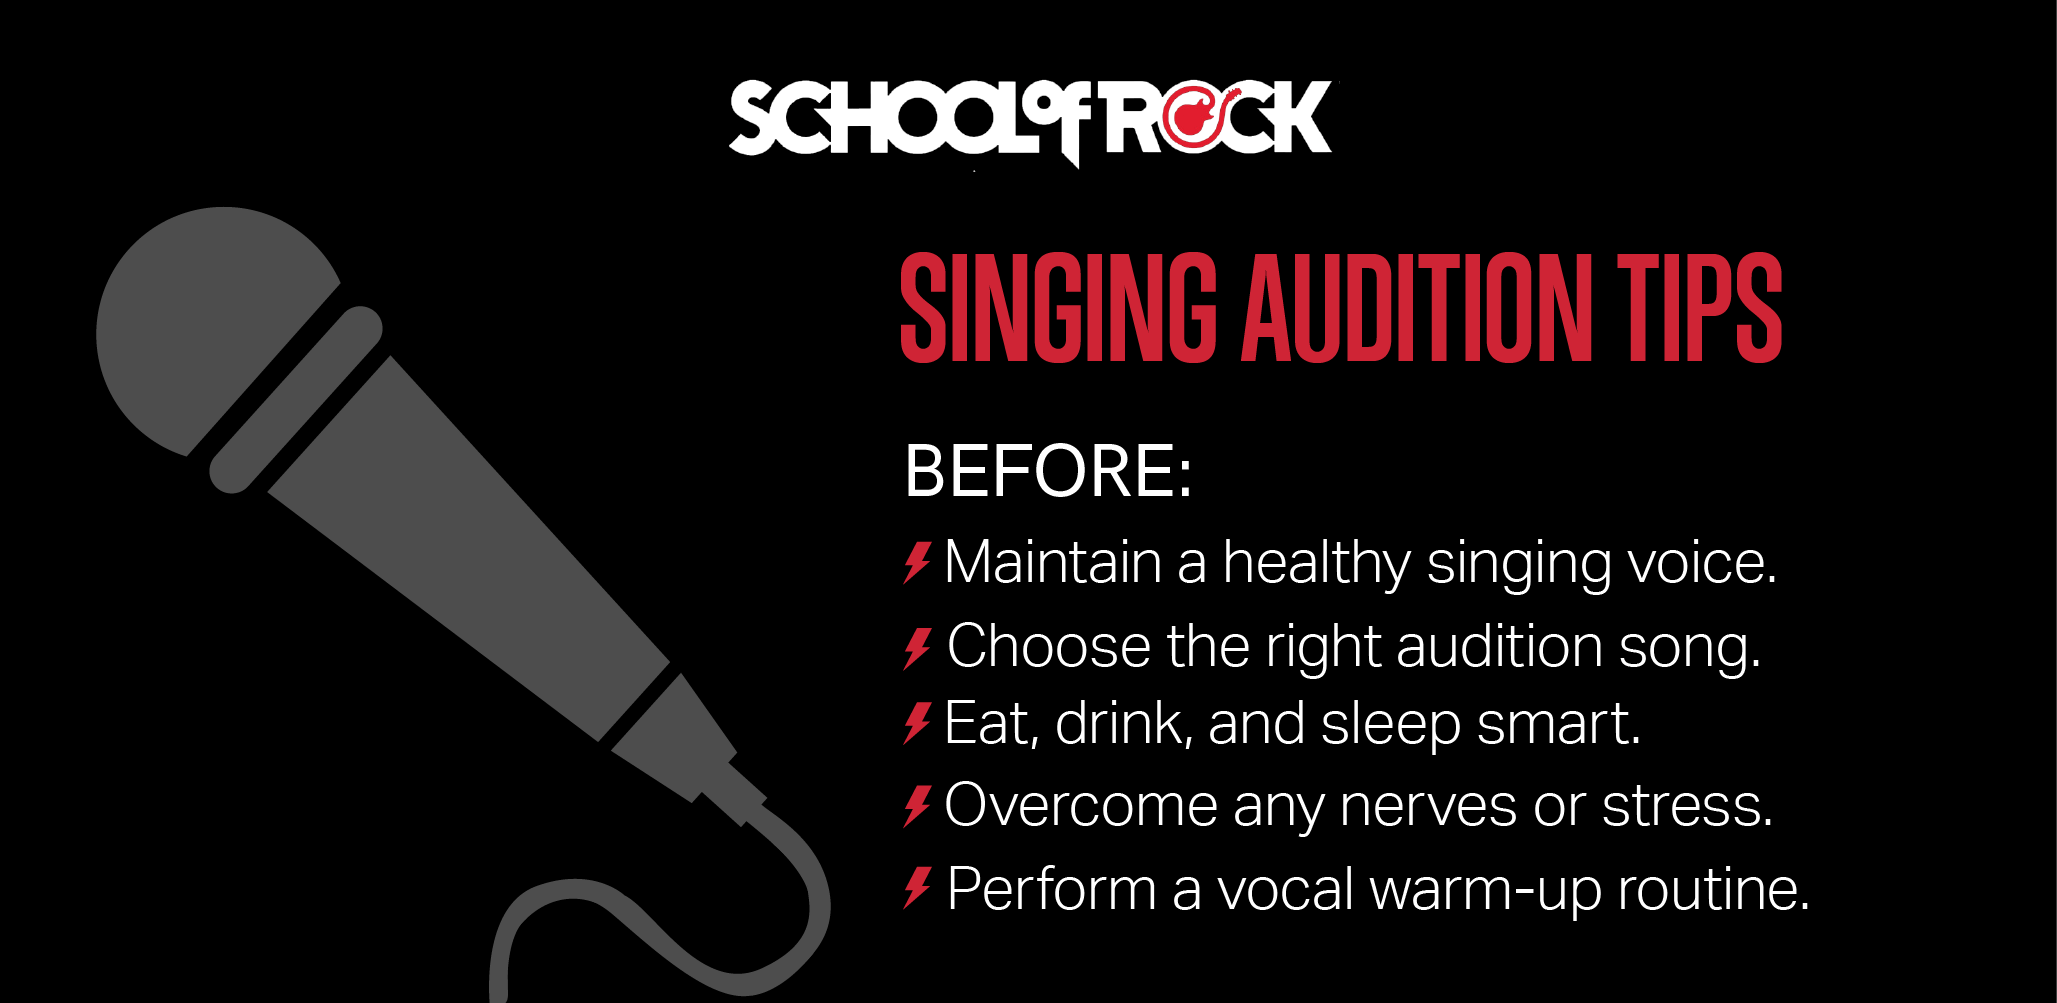 tips for before a singing audition